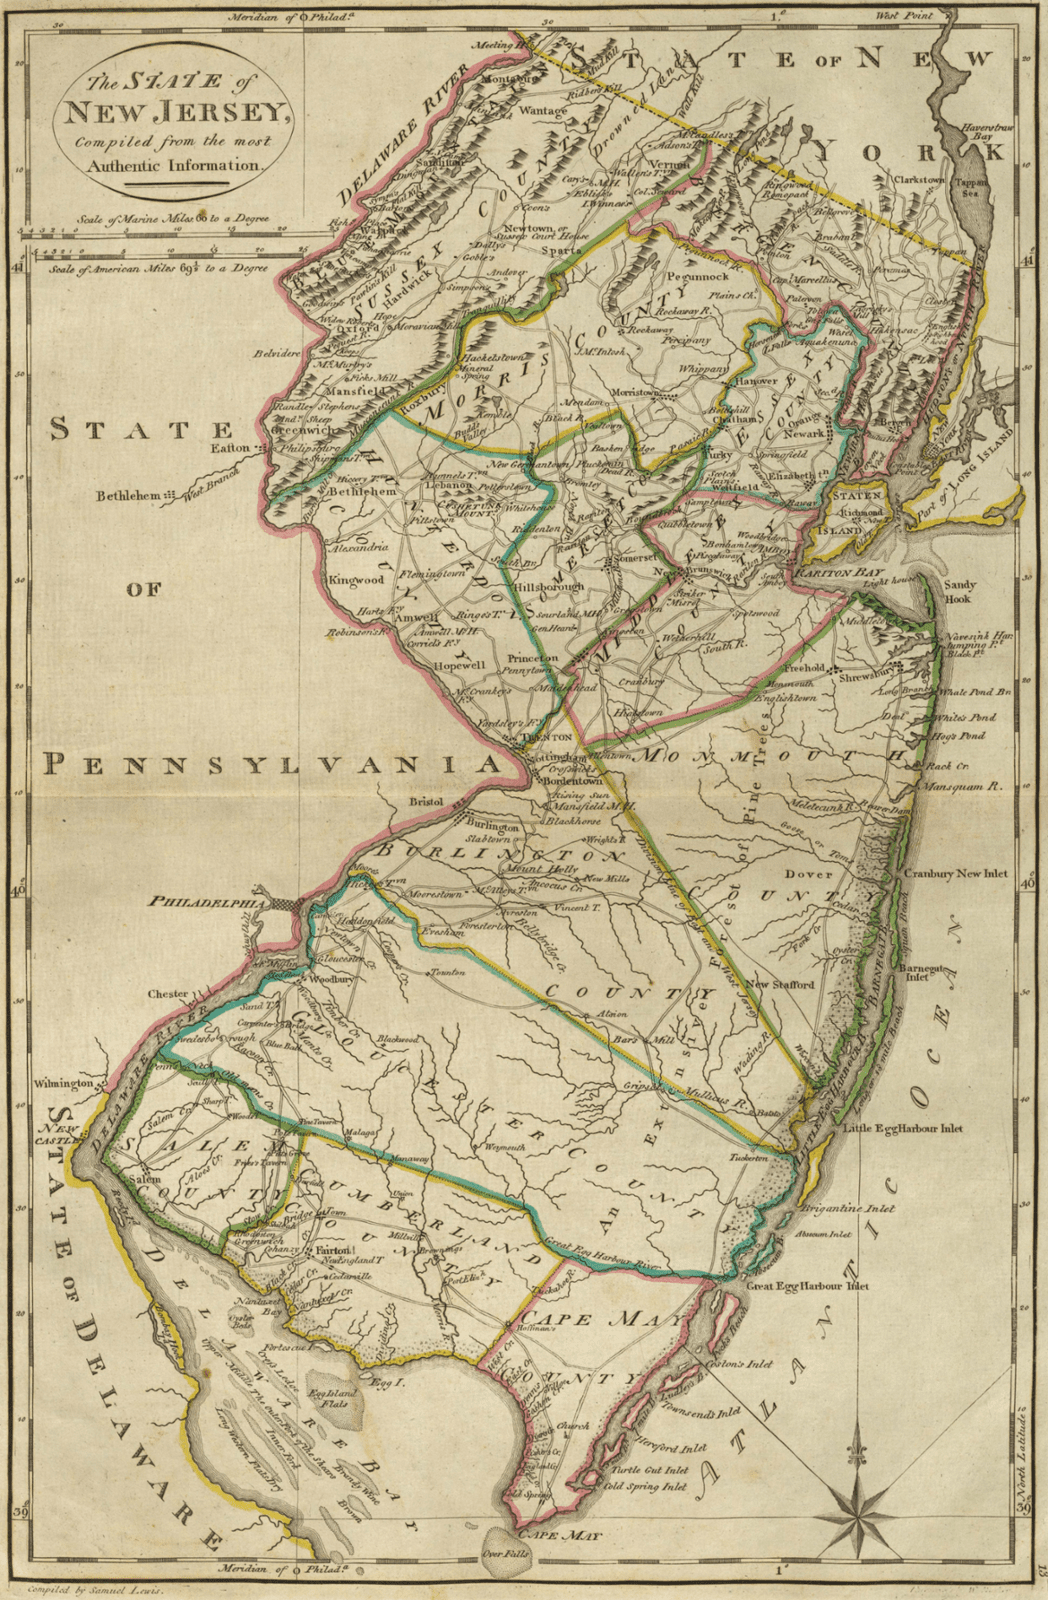 1814: Map of New Jersey